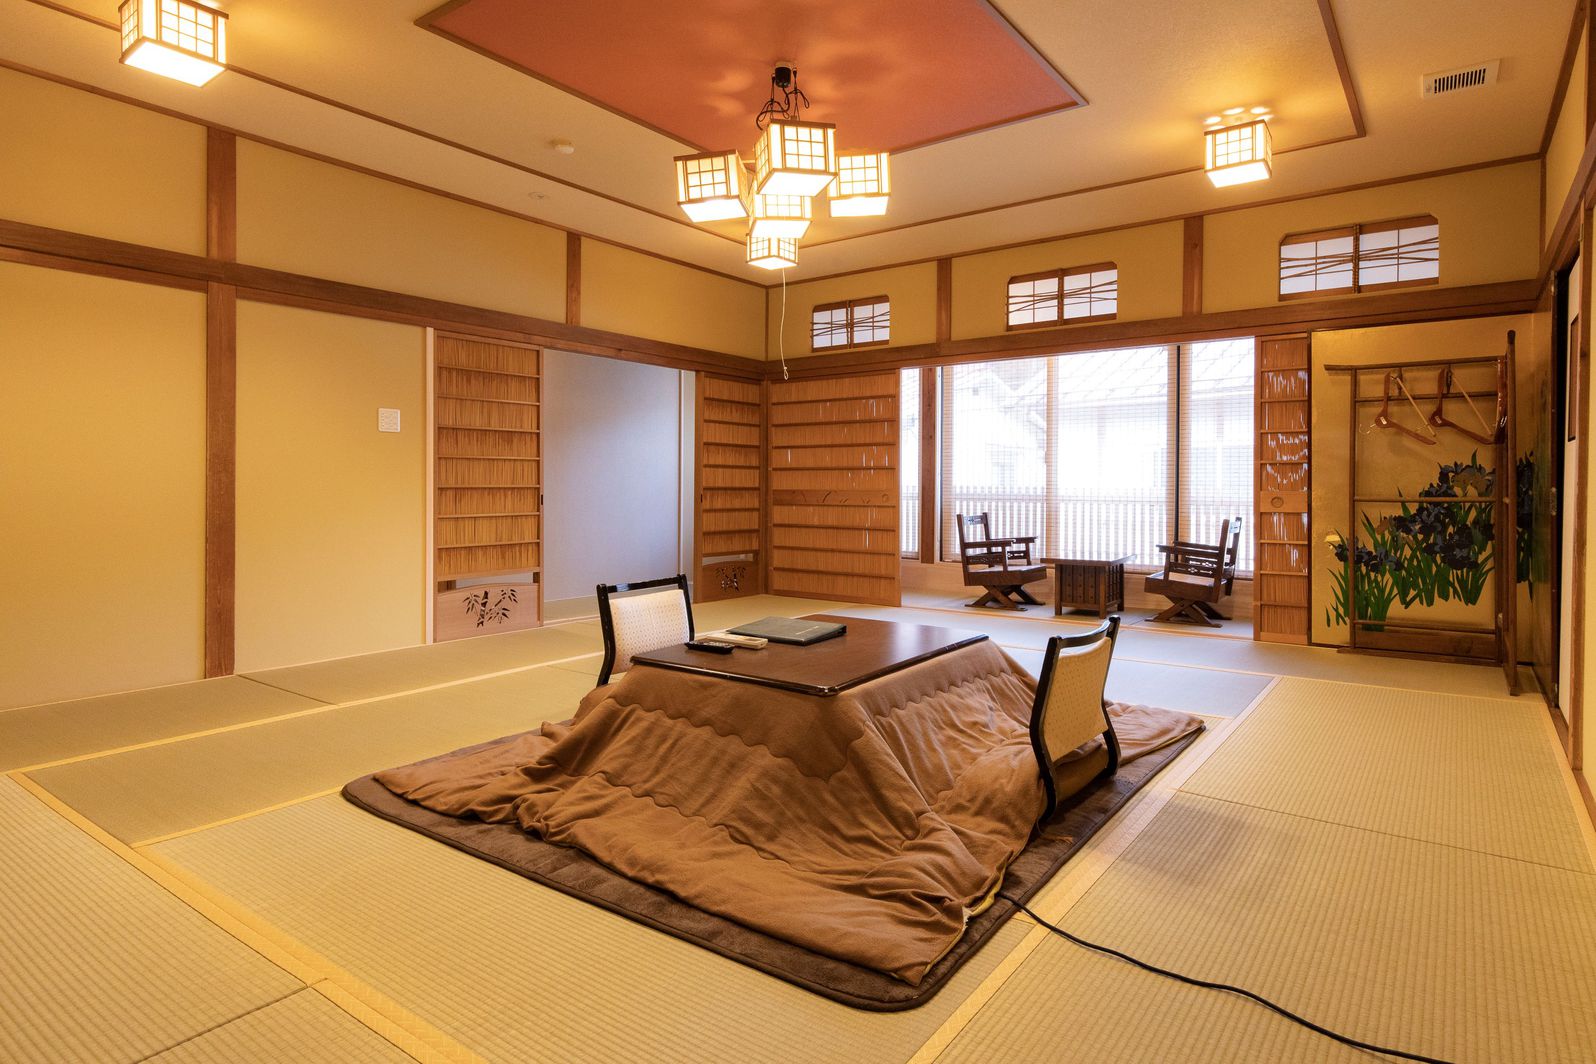 Dorogawa Onsen Gyoja no Yado Kakujin The 3-star Dorogawa Onsen Gyoja no Yado Kakujin offers comfort and convenience whether youre on business or holiday in Yoshino. The property offers guests a range of services and amenities designed t